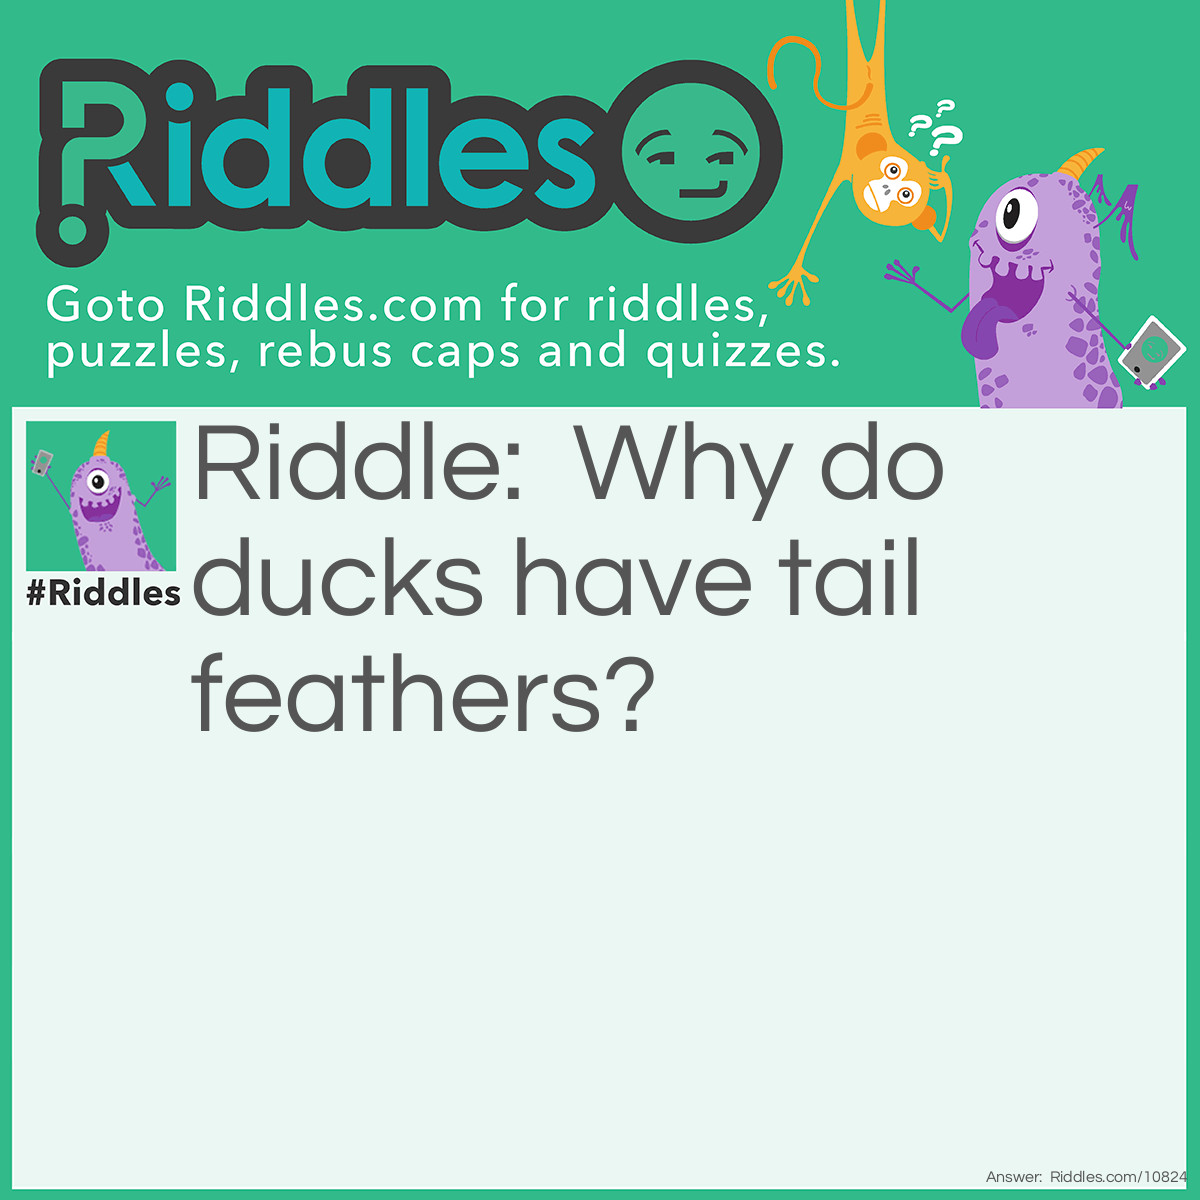 Riddle: Why do ducks have tail feathers? Answer: To cover its buttquack.